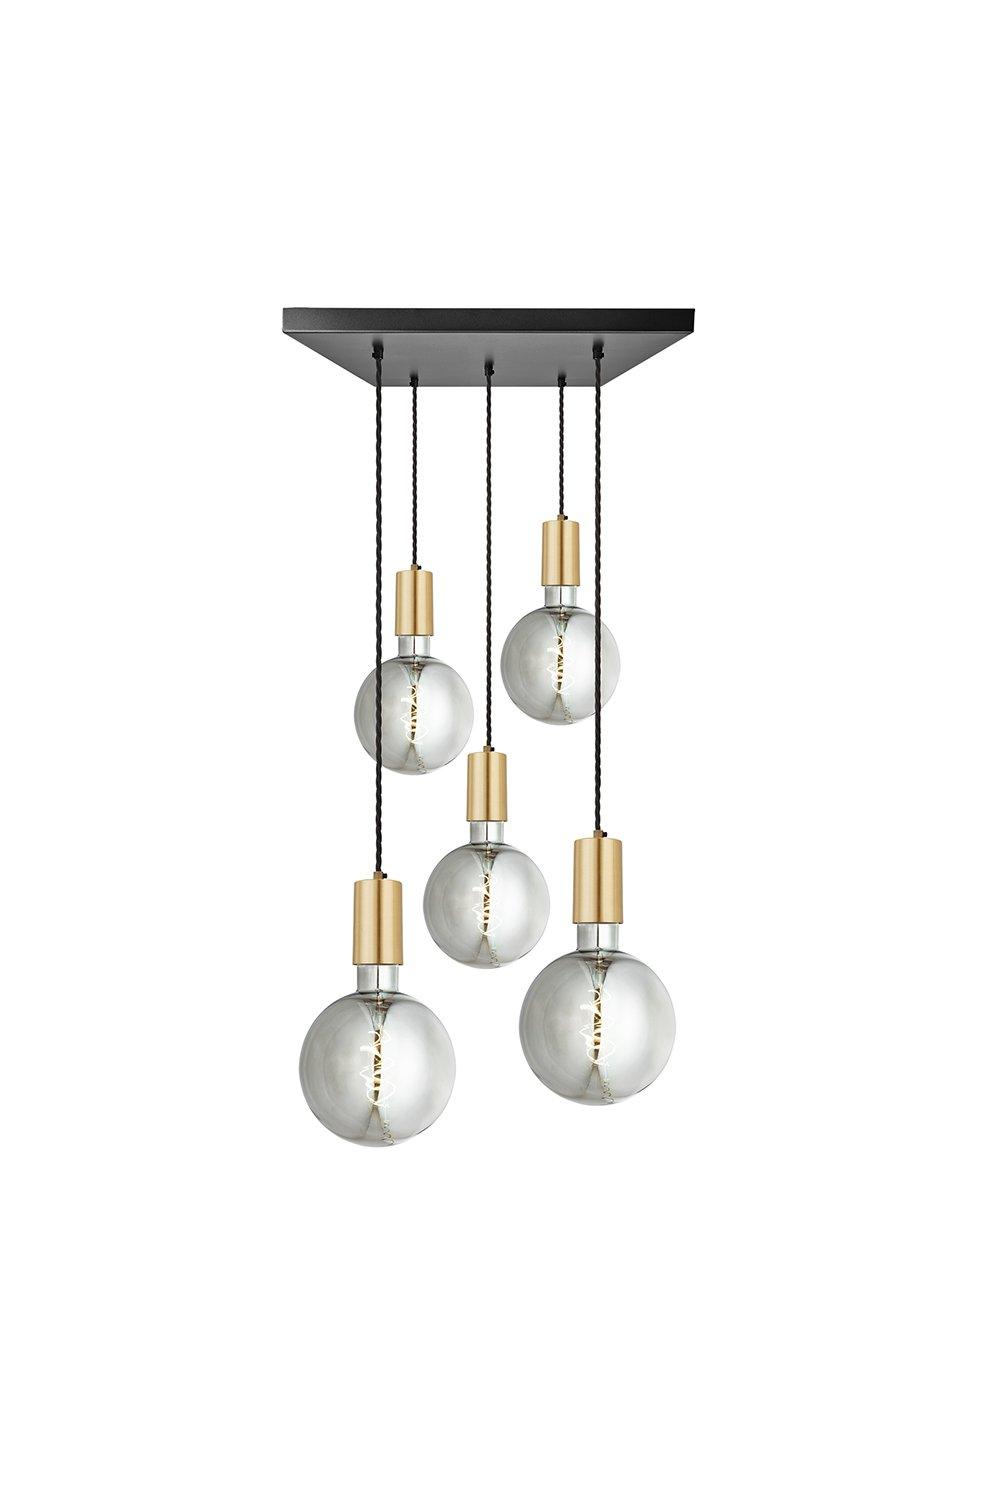 Sleek Large Edison Square Cluster Lights, 5 Wire - Brass